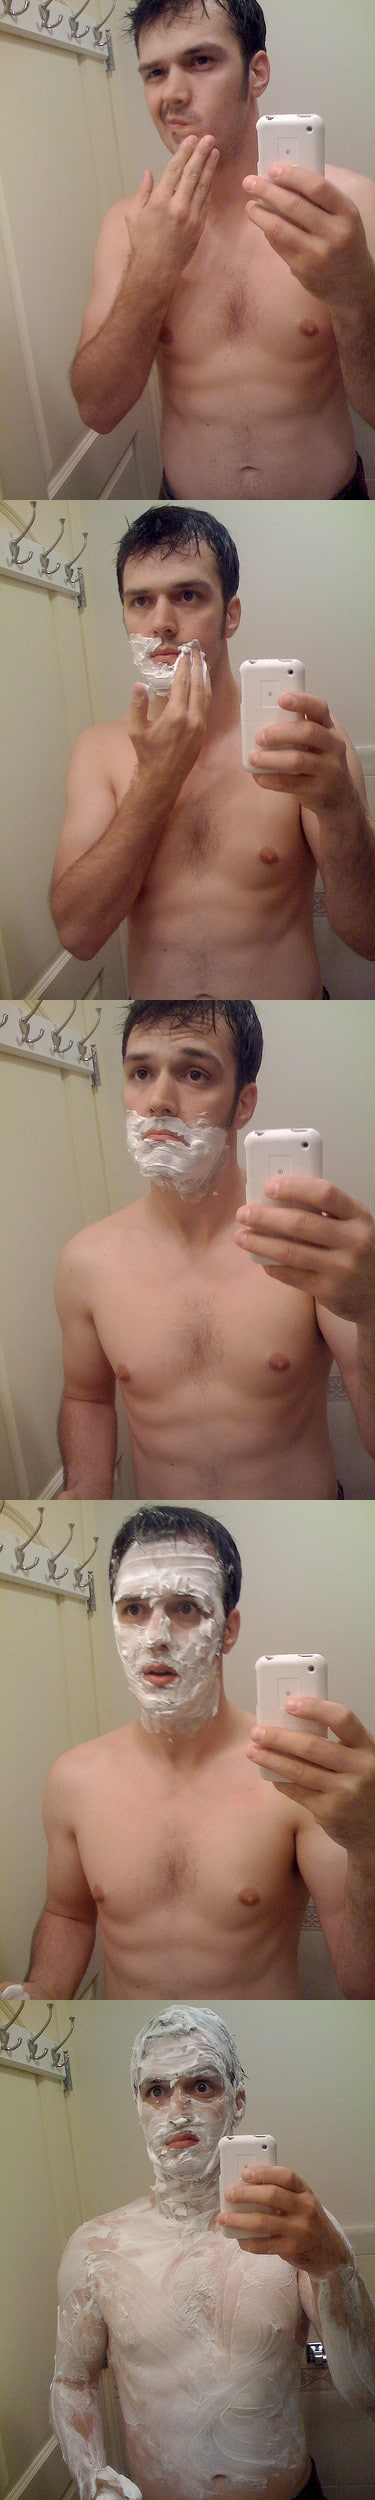 The Right Way to Shave